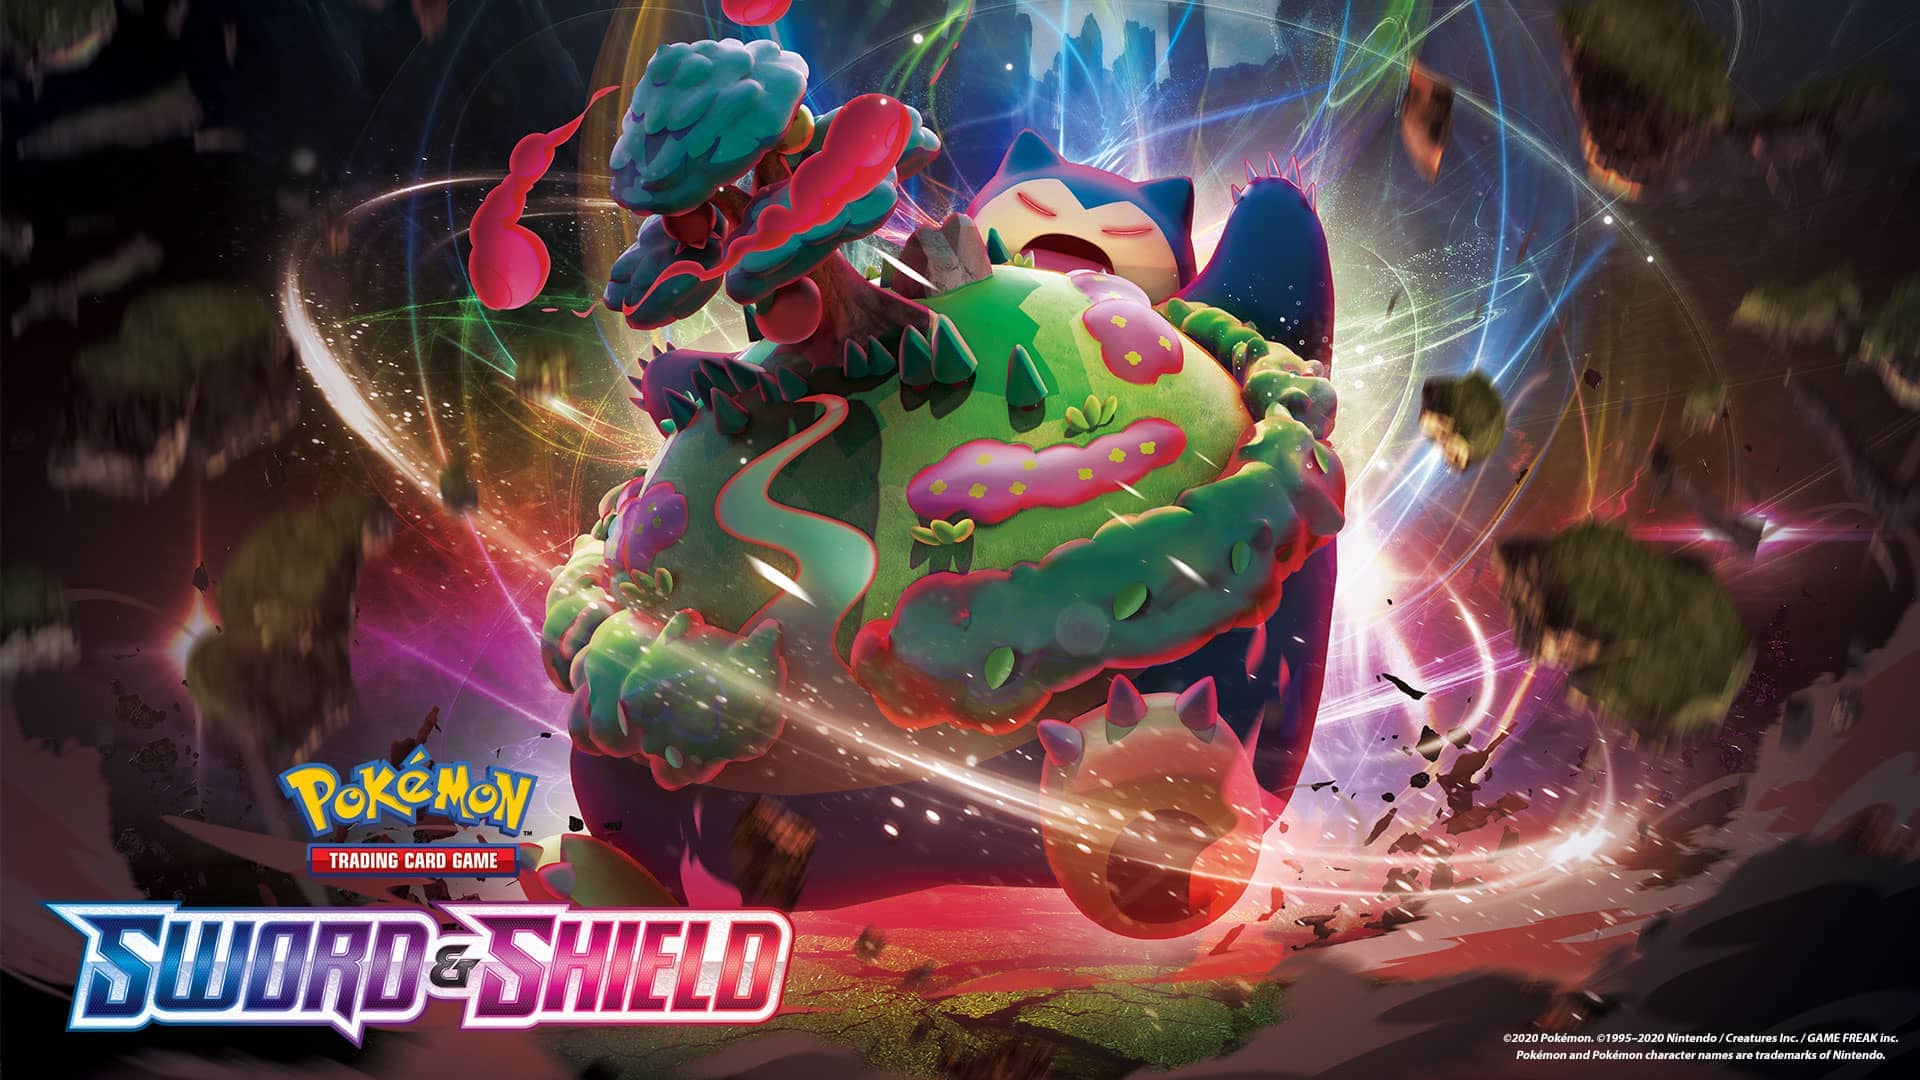 Snorlax VMAX deck is busted in Expanded. Pokemon TCG Online guide